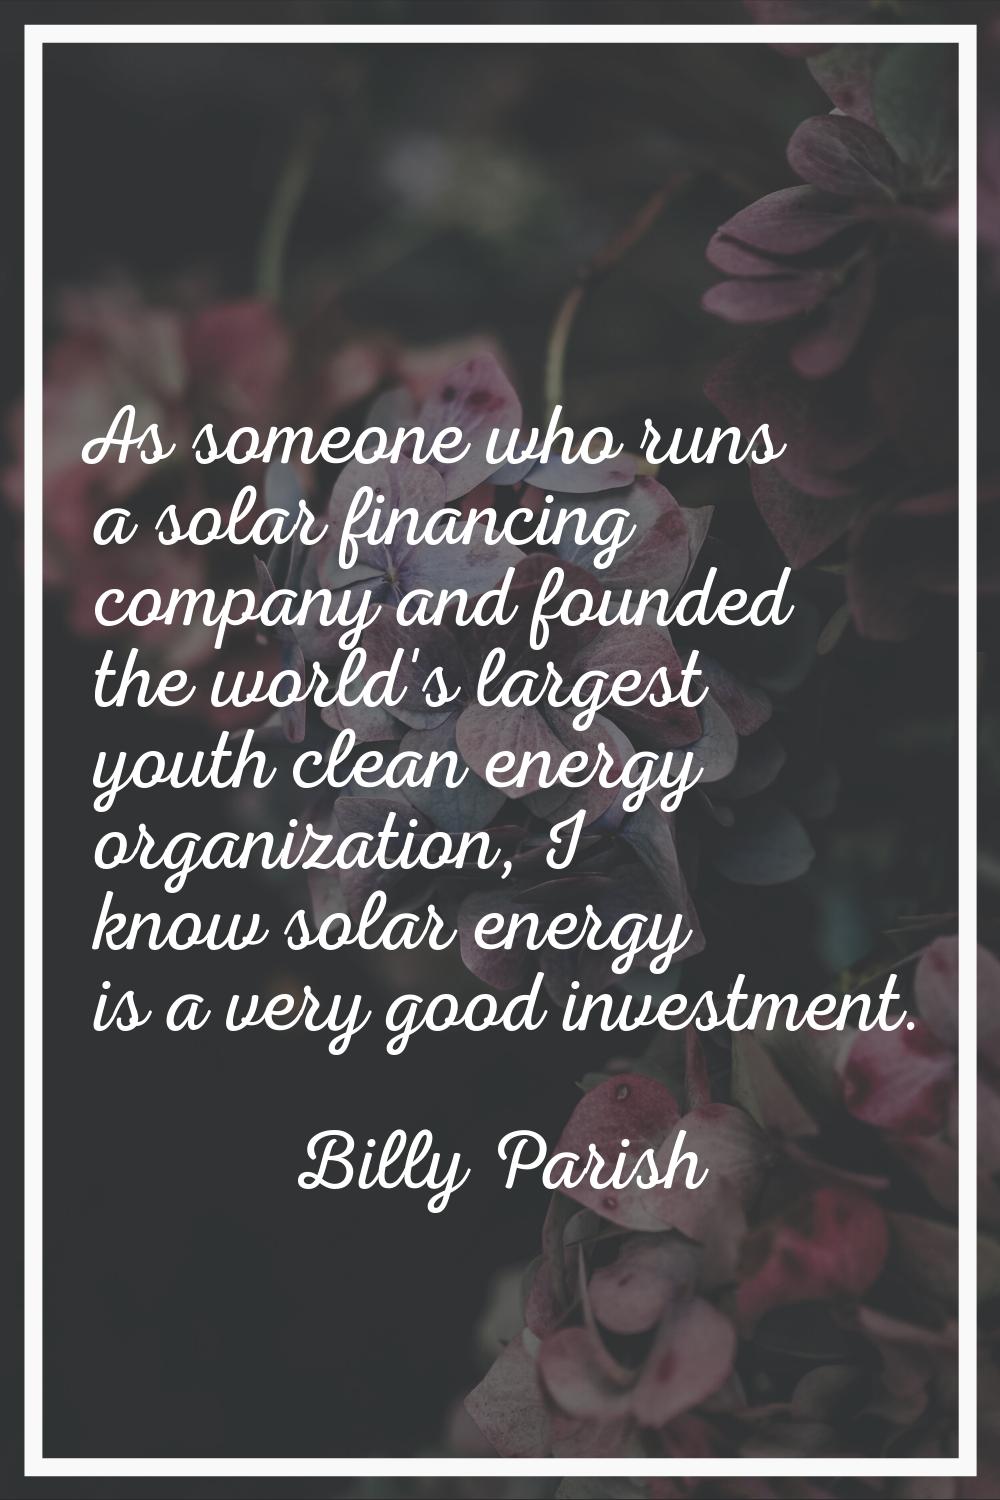 As someone who runs a solar financing company and founded the world's largest youth clean energy or